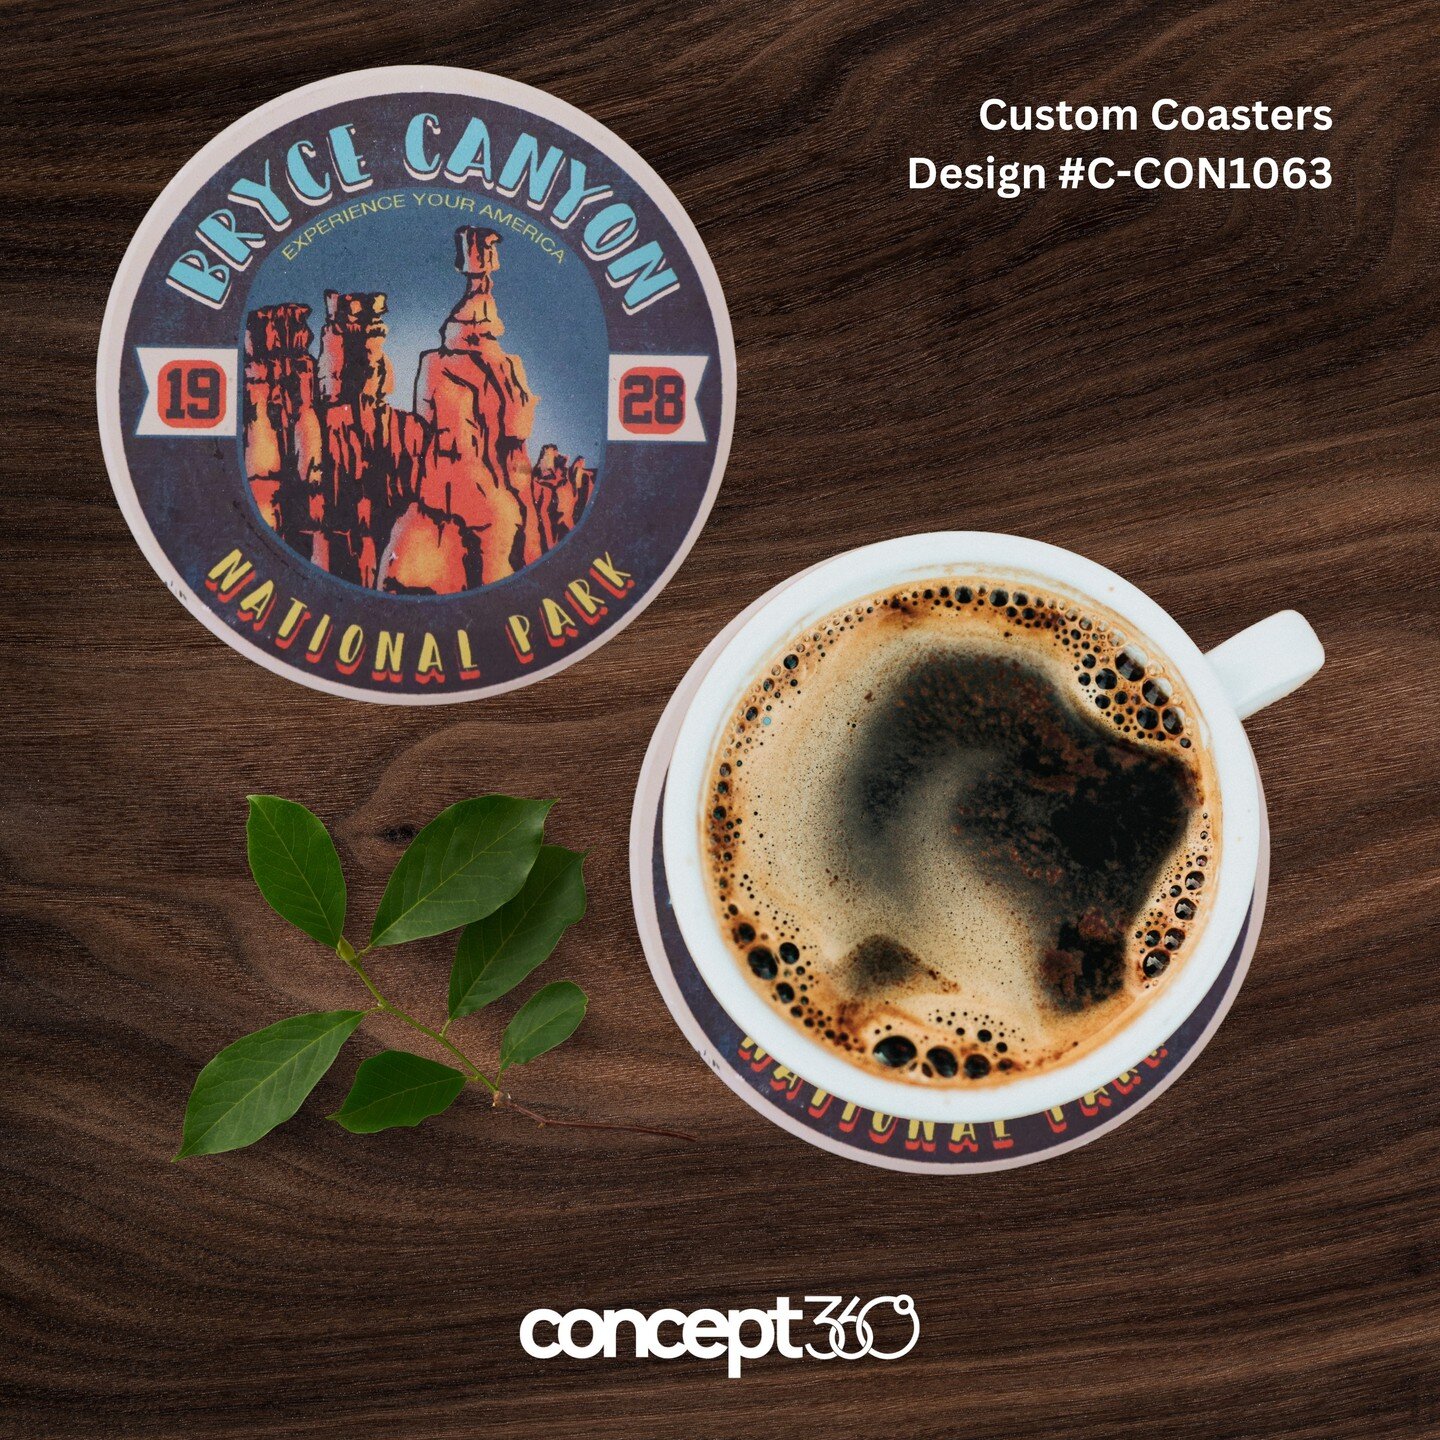 Imagine this: your morning coffee cradled in a coaster that captures the soul of Bryce Canyon's misty mornings. Every sip a reminder of sun-drenched hikes and stunning red rock formations. ✨ That's the magic of Concept 360 Apparel's custom national p